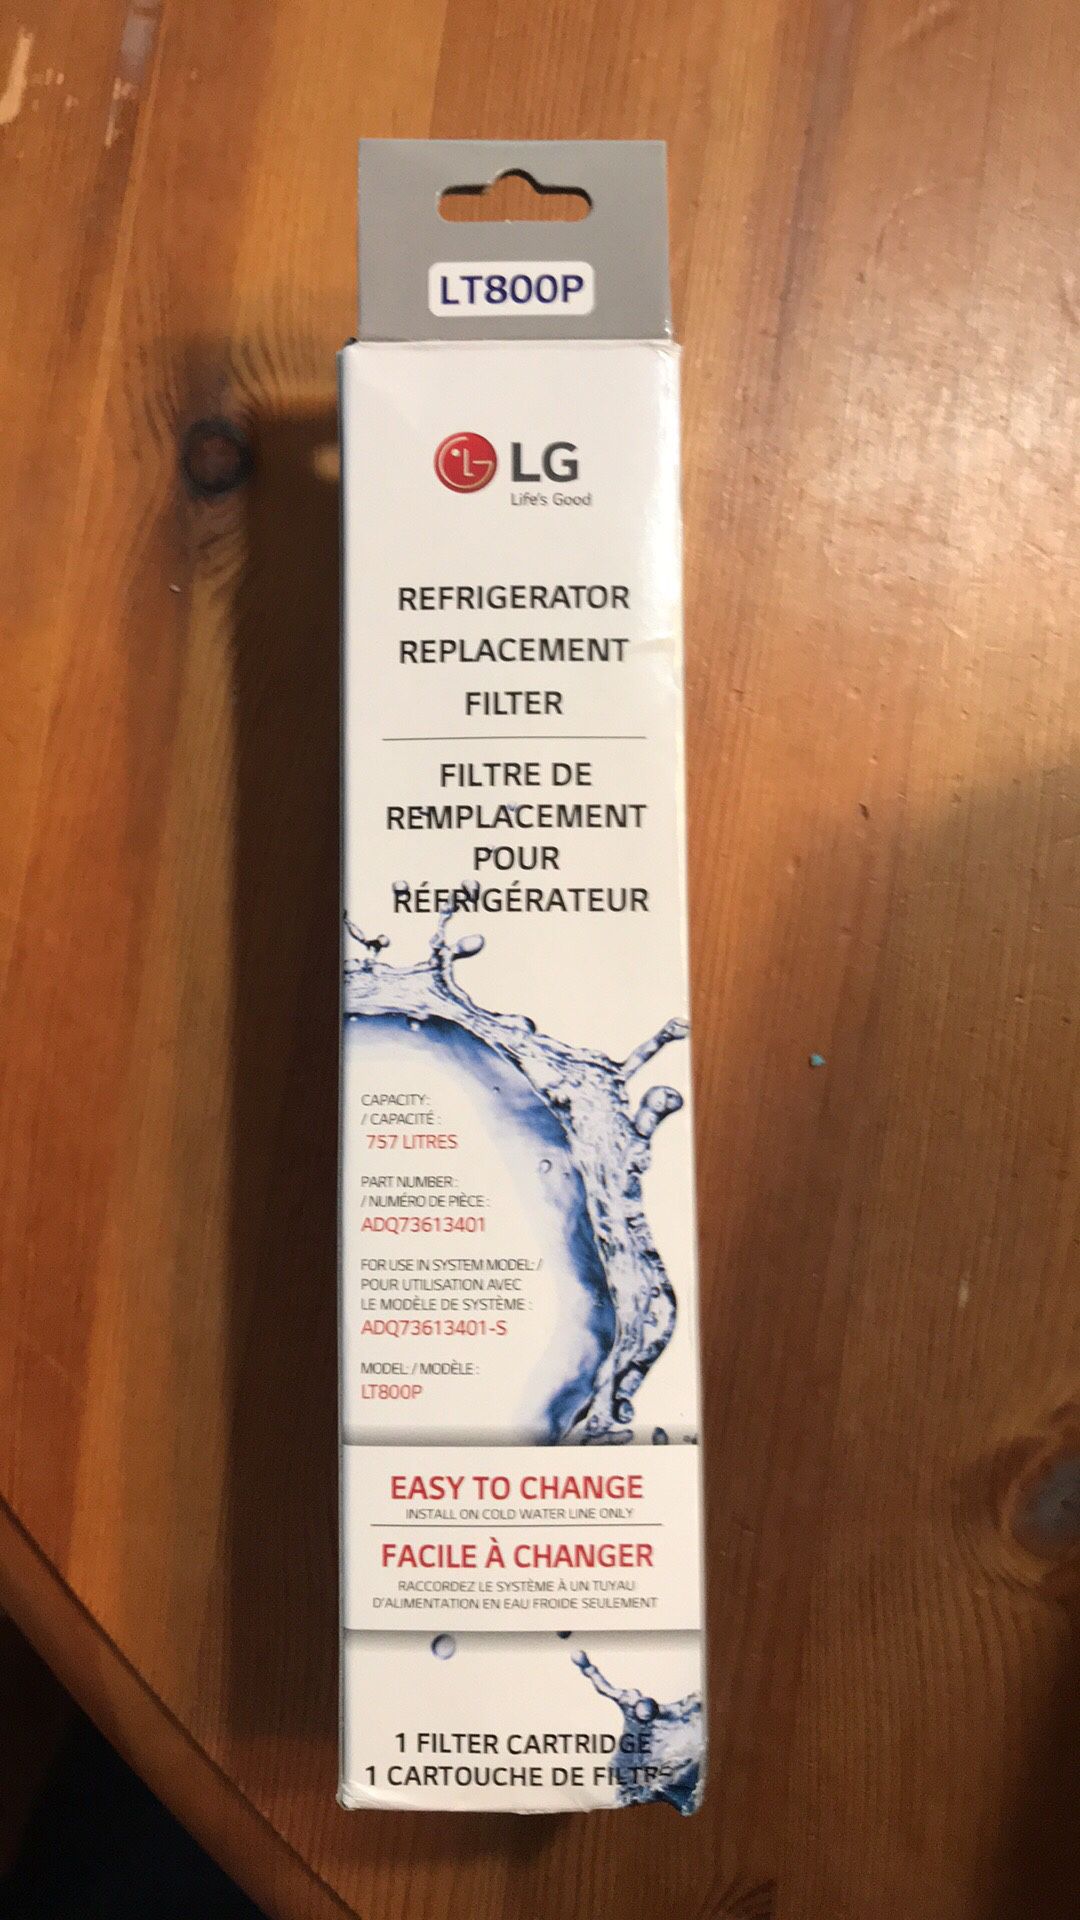 LG refrigerator replacement filter